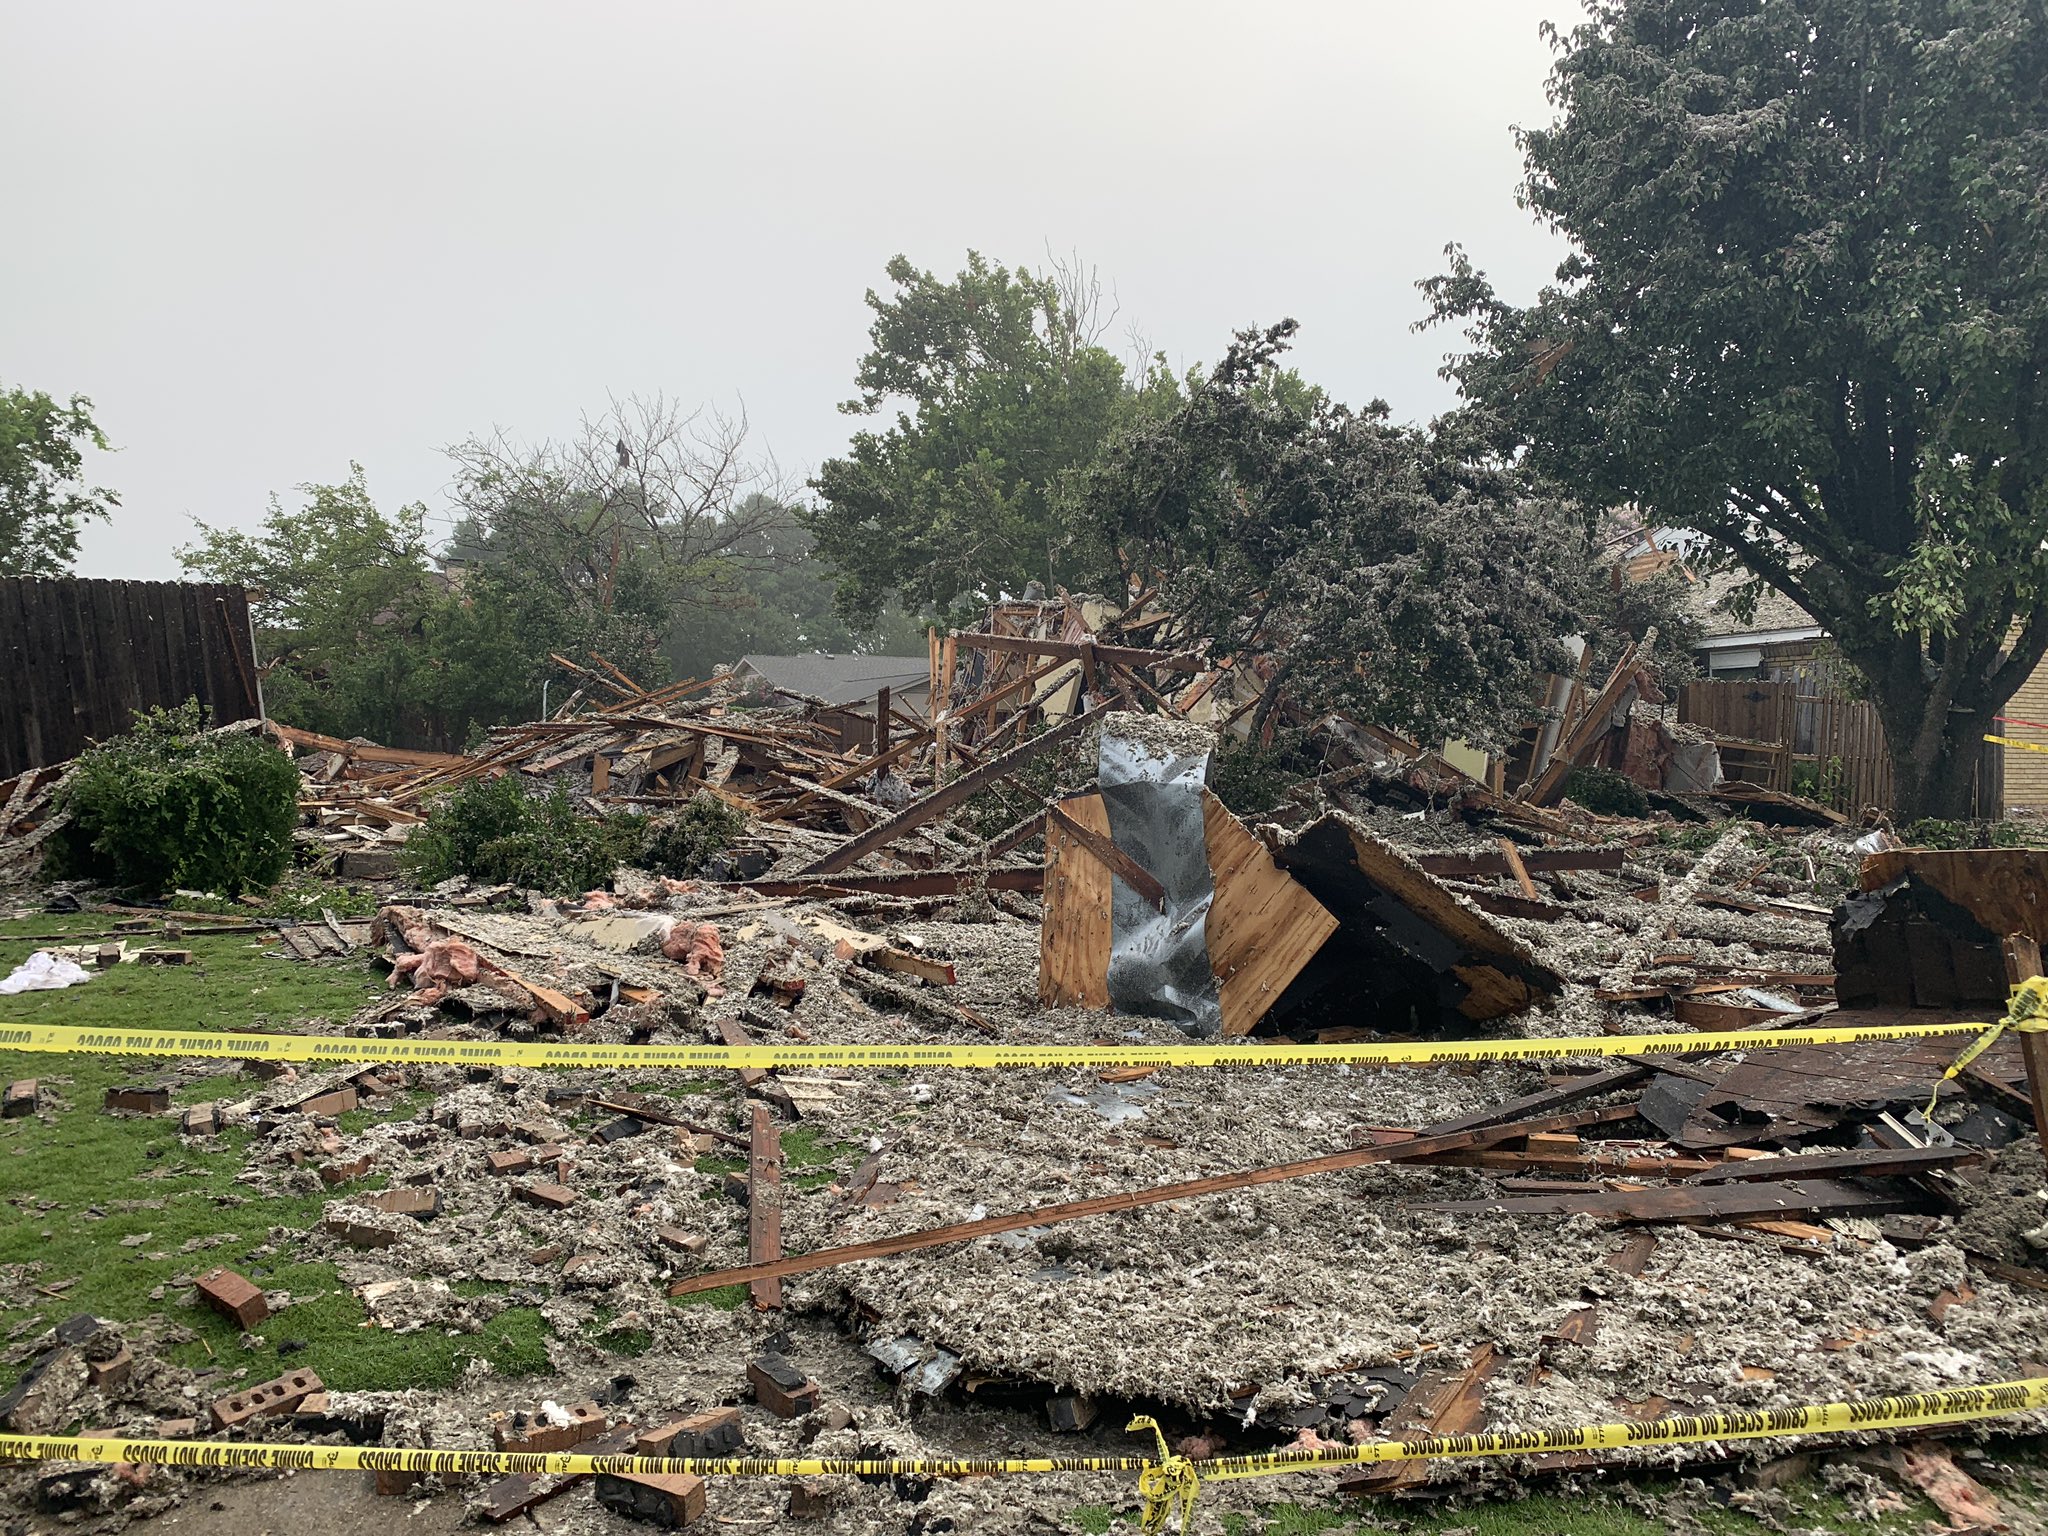 Six injured after house explosion in Plano